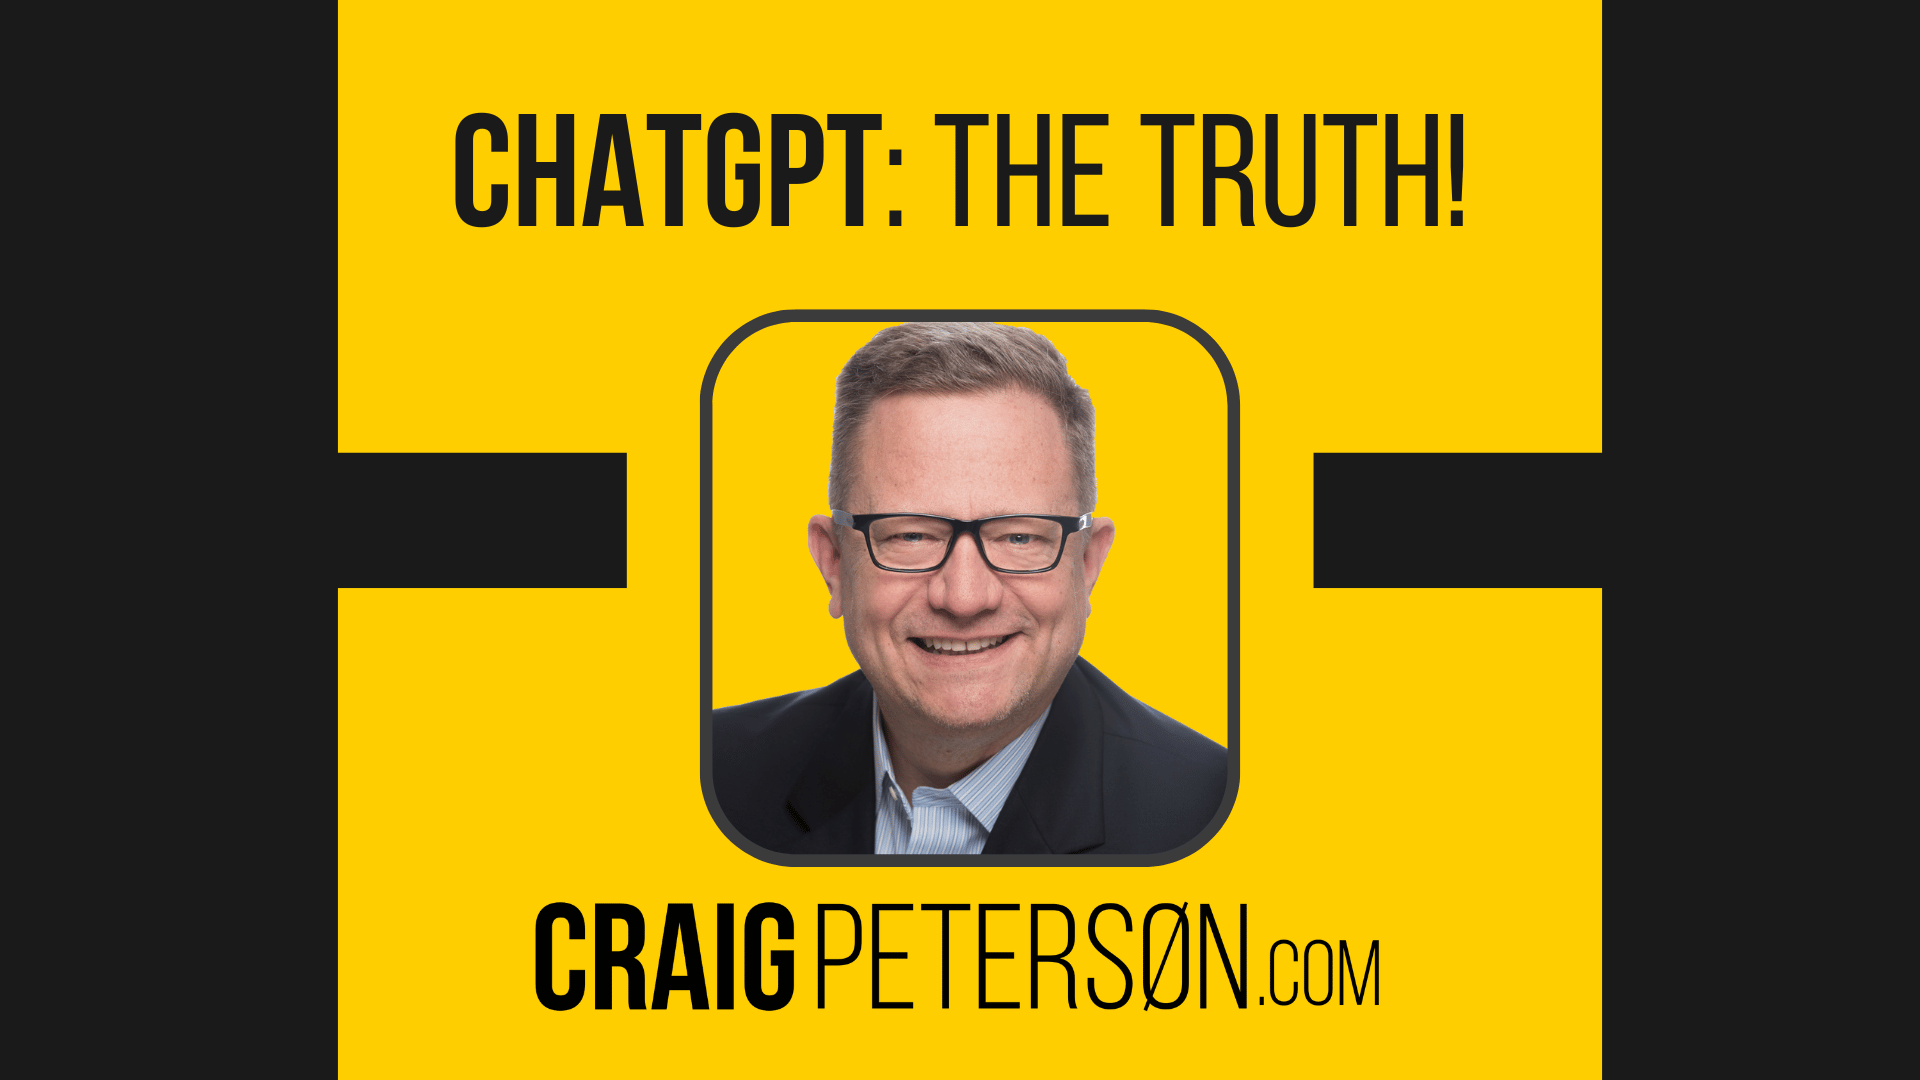 The Truth About ChatGPT and A.I. - Discover the Secrets of Internet Anonymity and Protect Your Privacy